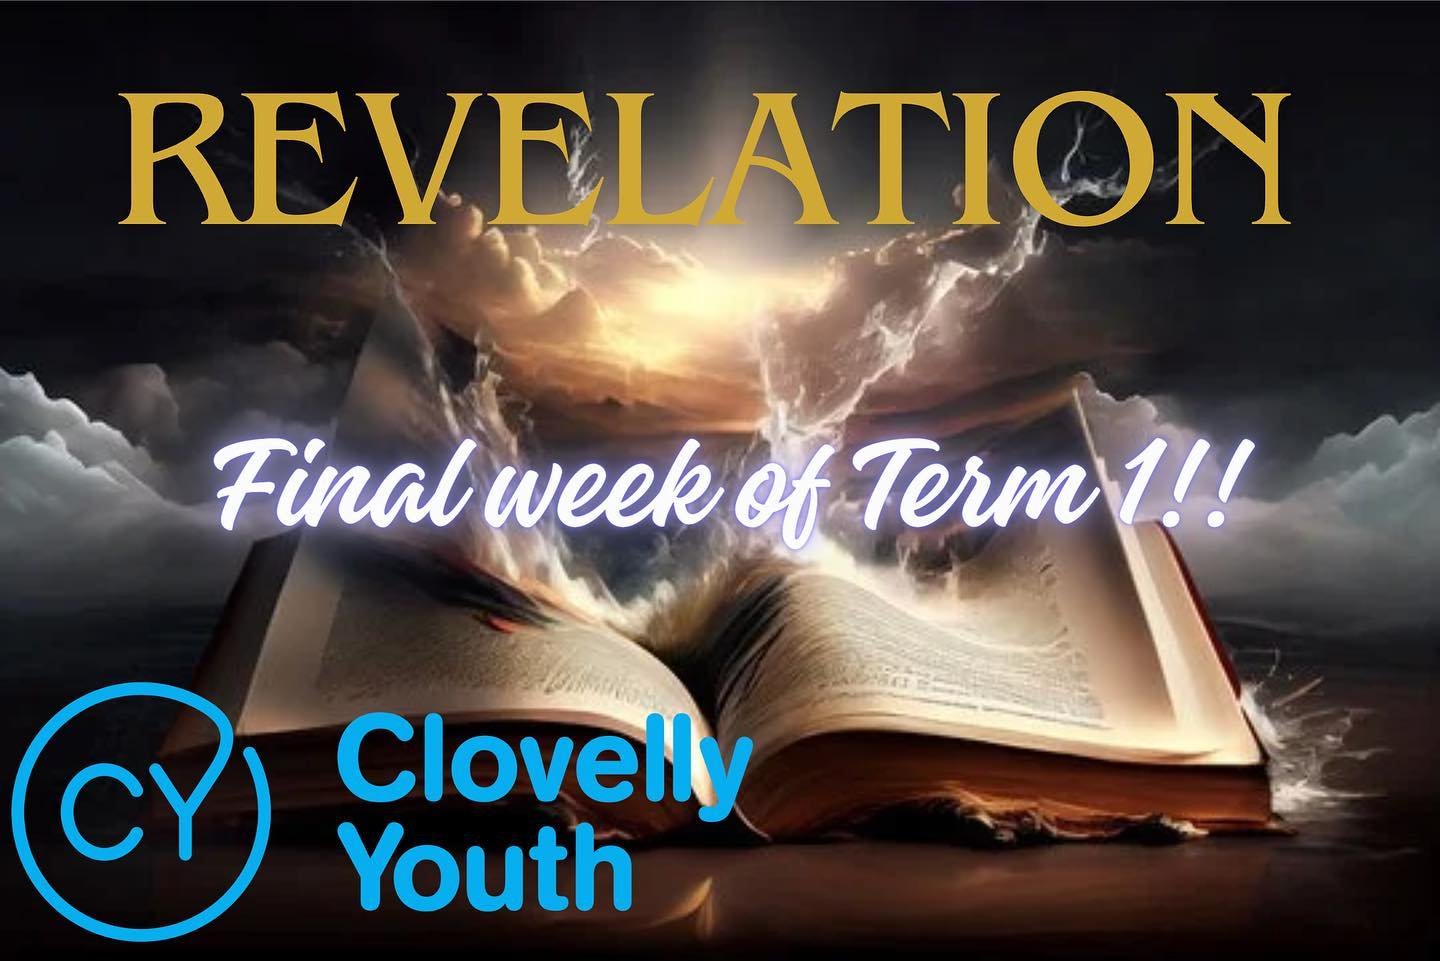 guys it&rsquo;s already the end of term this is so sad! 😢😢

BUT!!

WE&rsquo;RE LOOKING AT REVELATION THIS WEEK SO GETT PUMMPPPPEEEDD!!!🧨🧨🧨🧨

no but seriously revelation has got so much to offer and is so interesting so make sure you&rsquo;re he